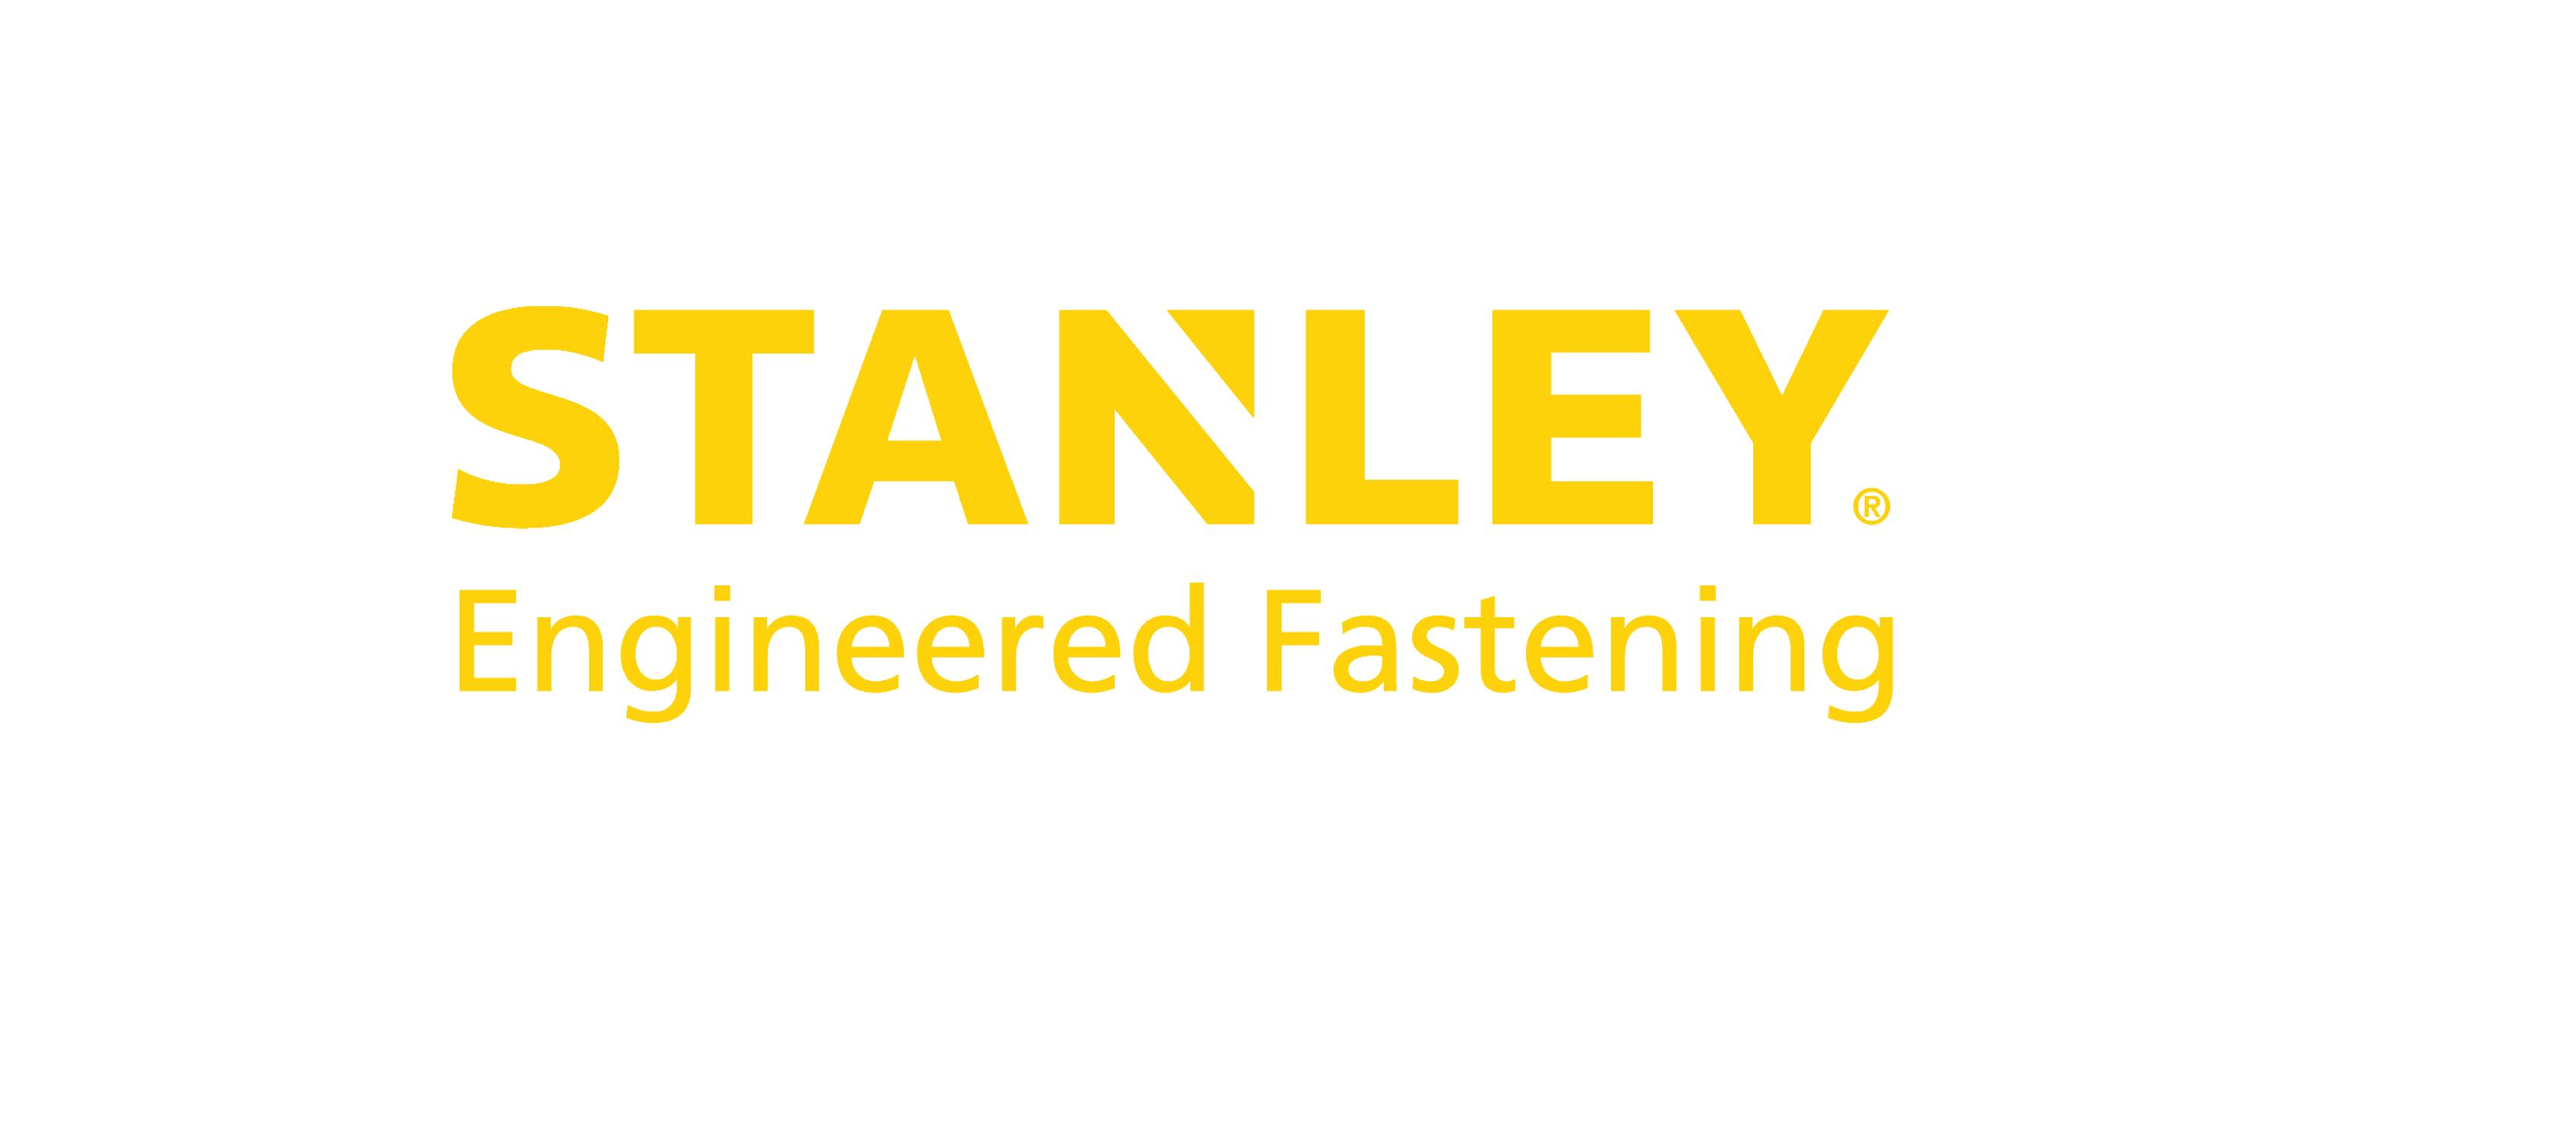 STANLEY Product Training (July 15th-18th)